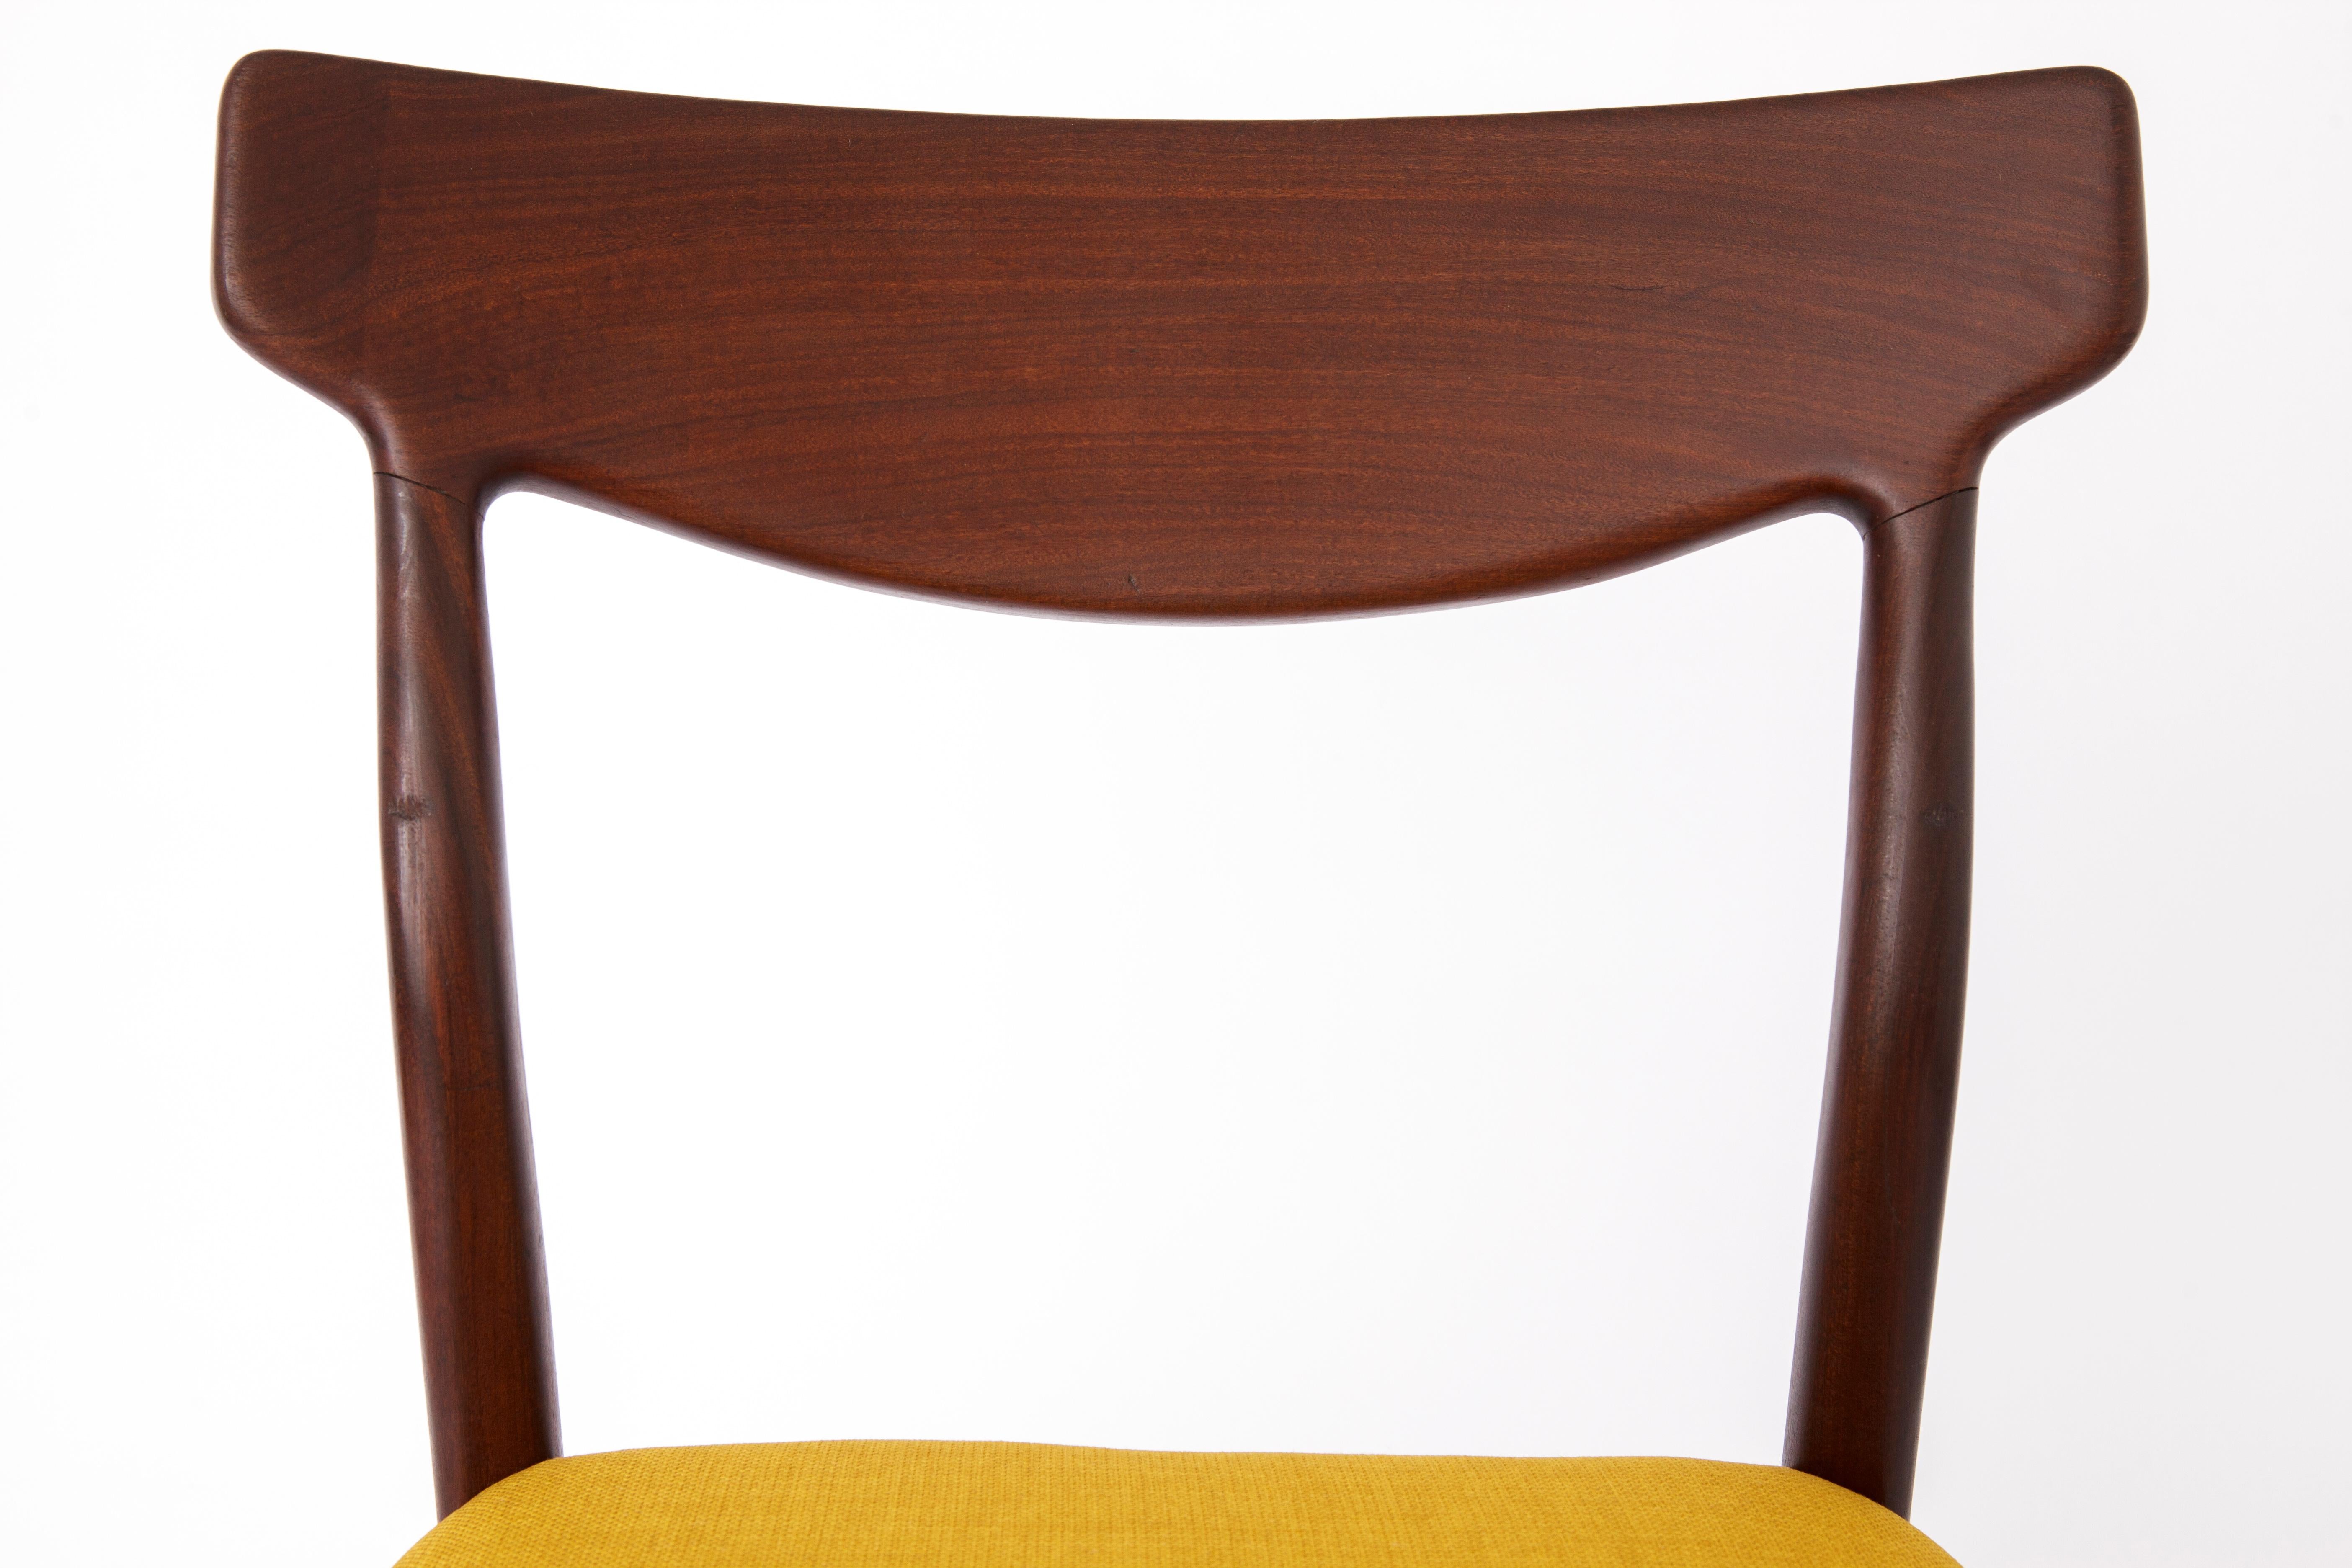 Nice Teak chair design by Gustav Herkströter for manufacturer Lübke, Germany. 
Production period: 1960s. 
Can be used with another set of 3 chairs which are similar as a total set of 4 dining chairs. See last pictures. 

Stable teak frame. Regular